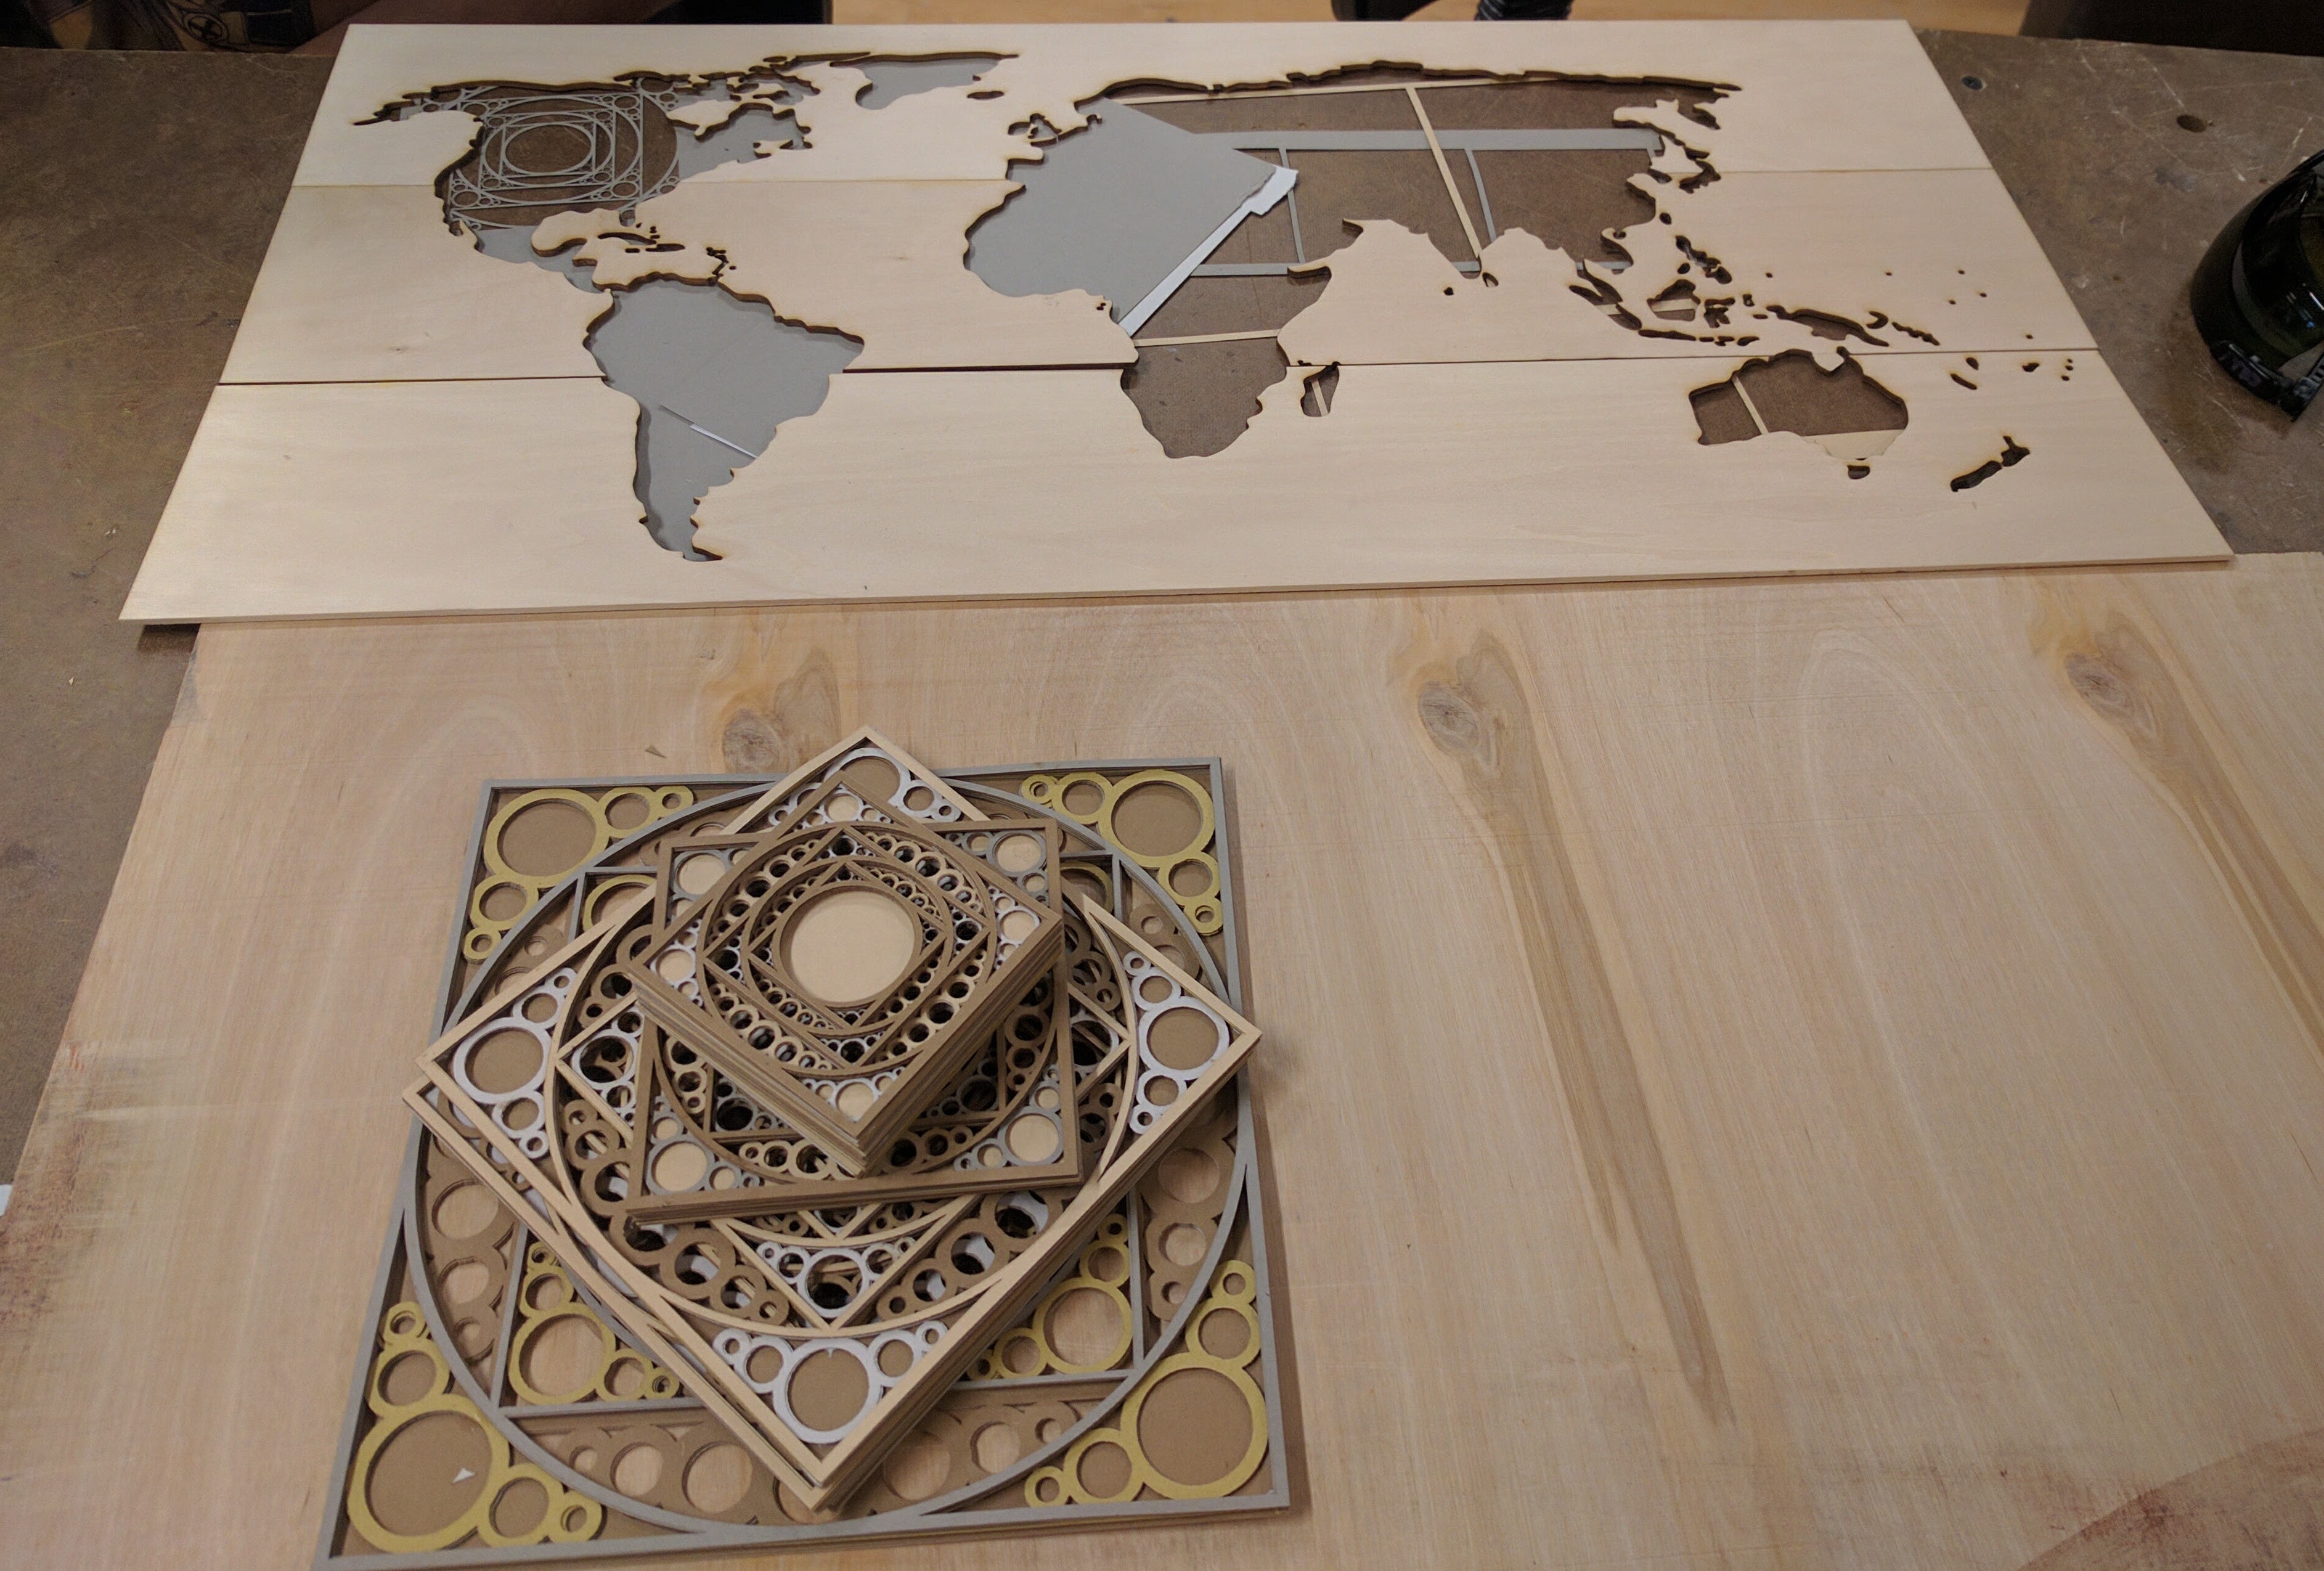 bass wood with world map cut out and laser cut paper